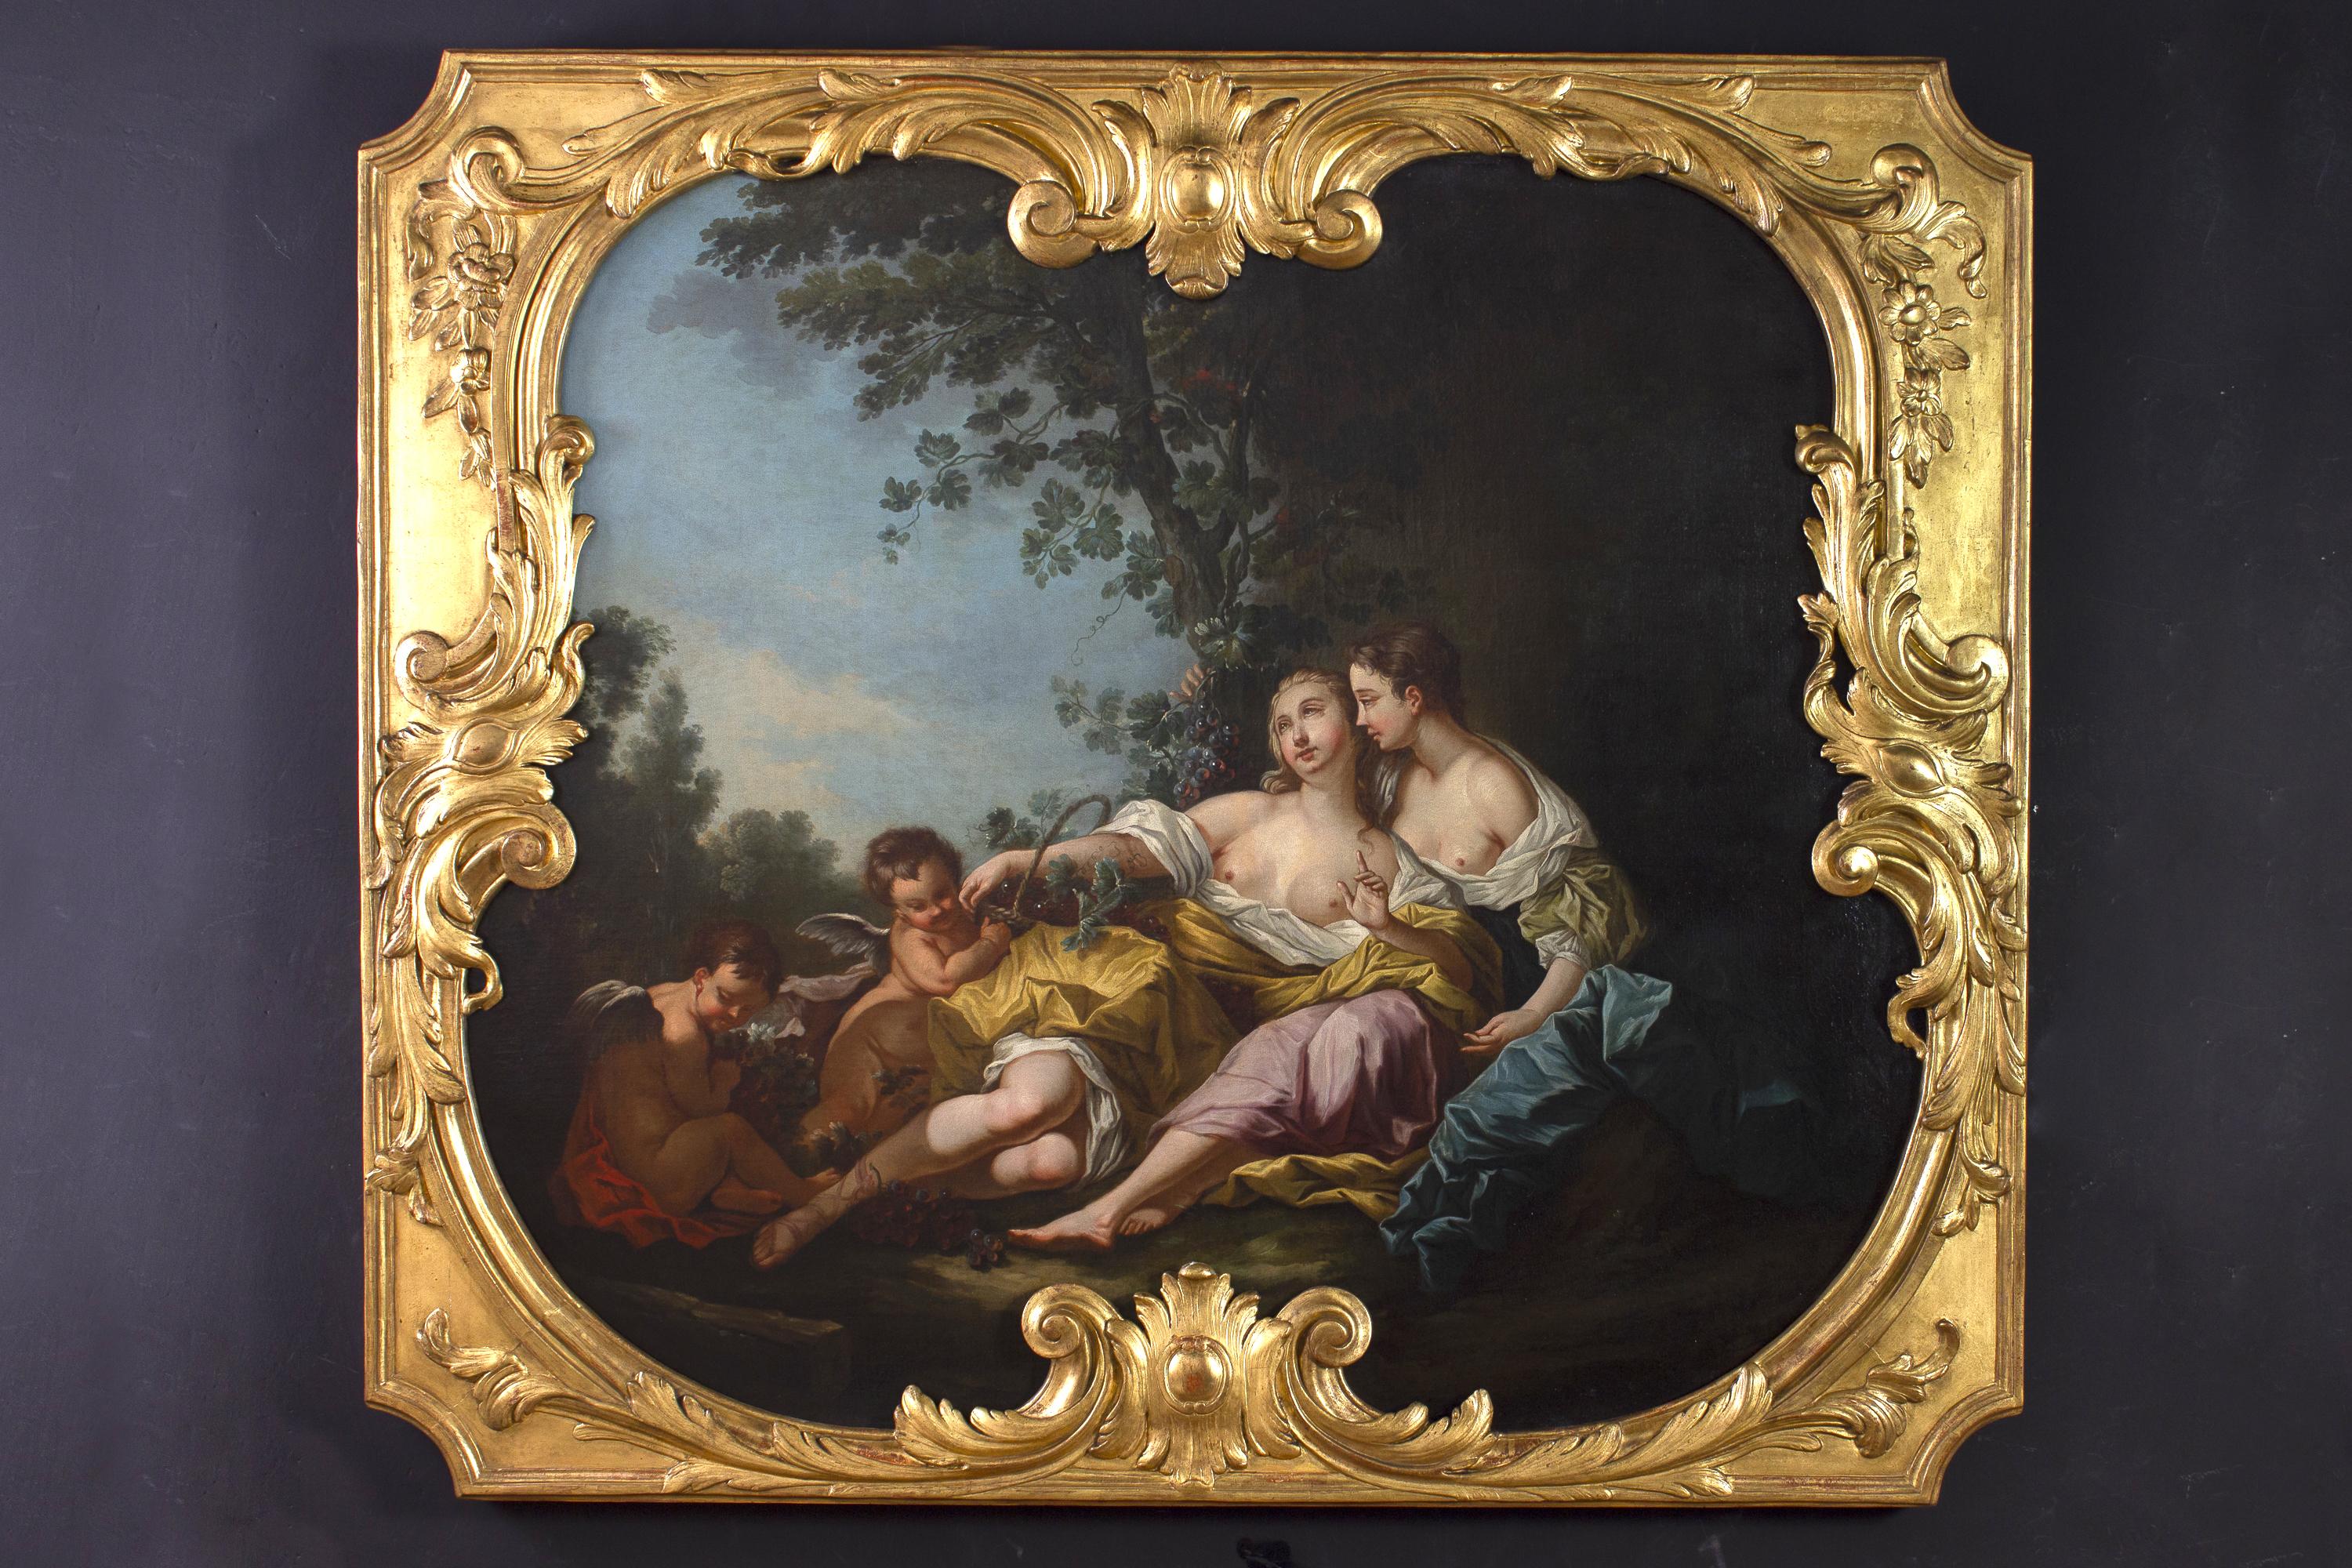 Pair of Large 18' Century French Oil Paintings after Francois Boucher For Sale 8